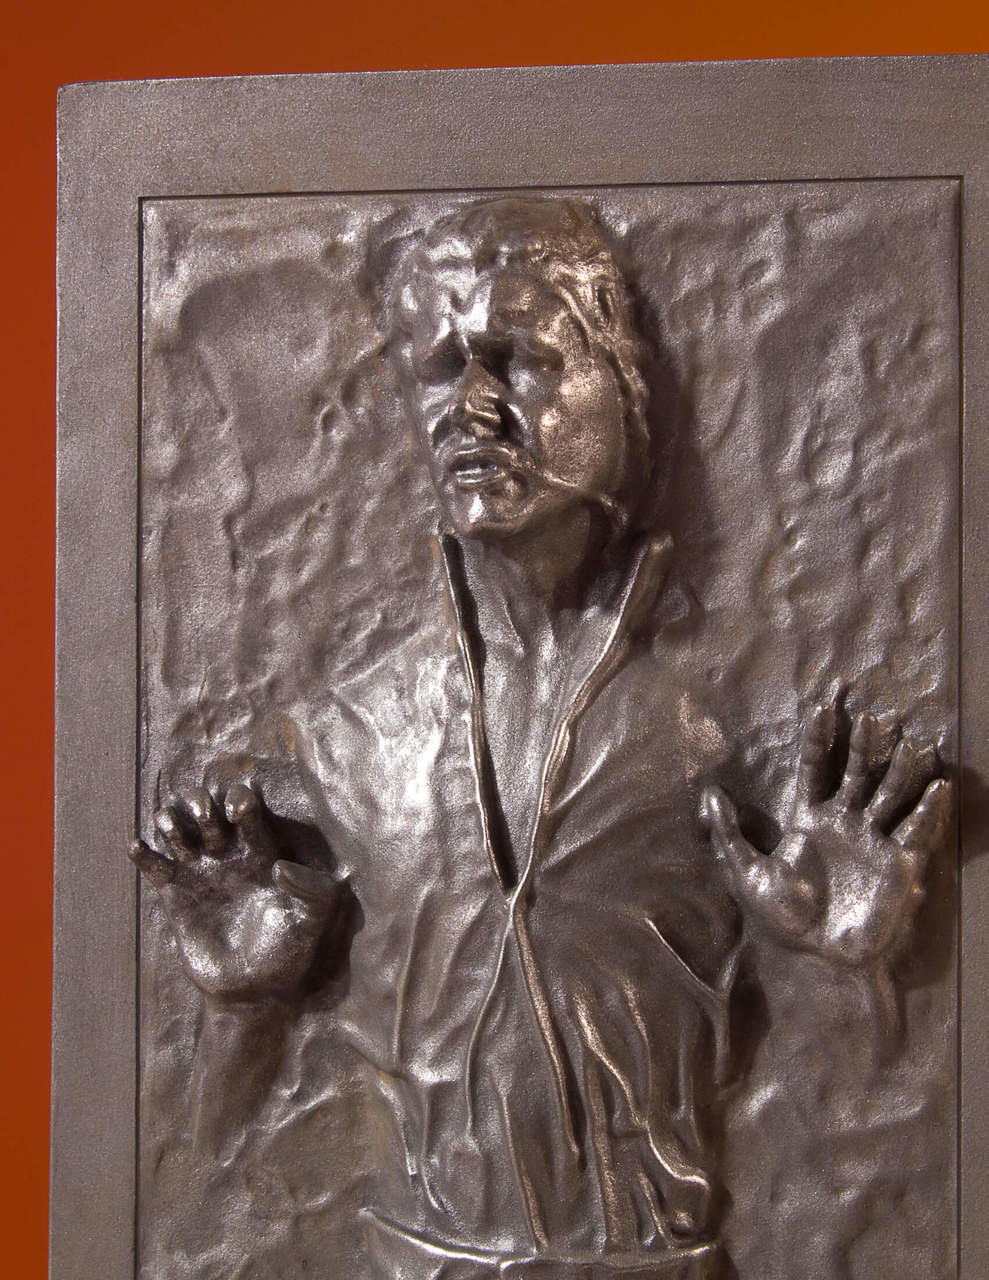 Star Wars Han Solo in Carbonite Collector's Gallery Statue